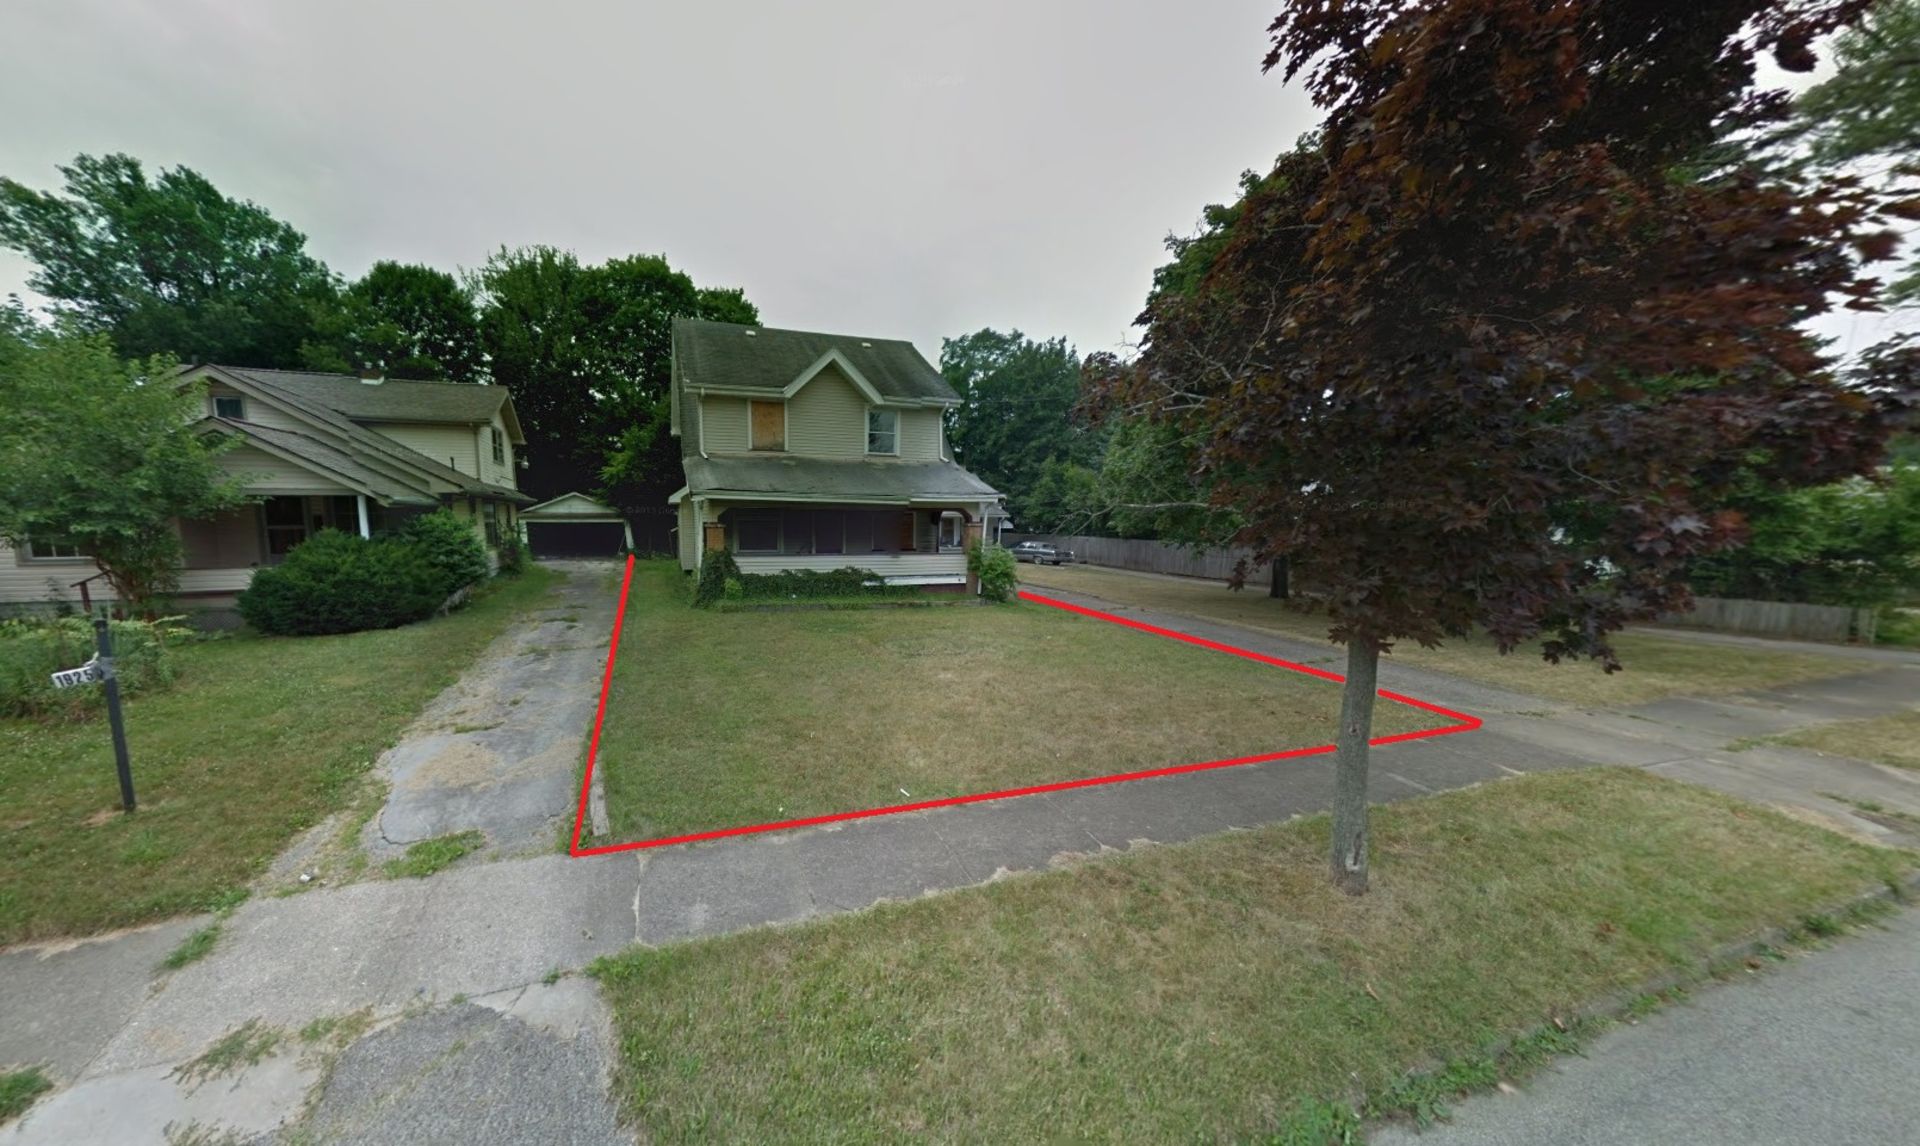 PLOT OF LAND AT 1921 S HEIGHTS AVENUE, YOUNGSTOWN, OHIO - Image 6 of 7